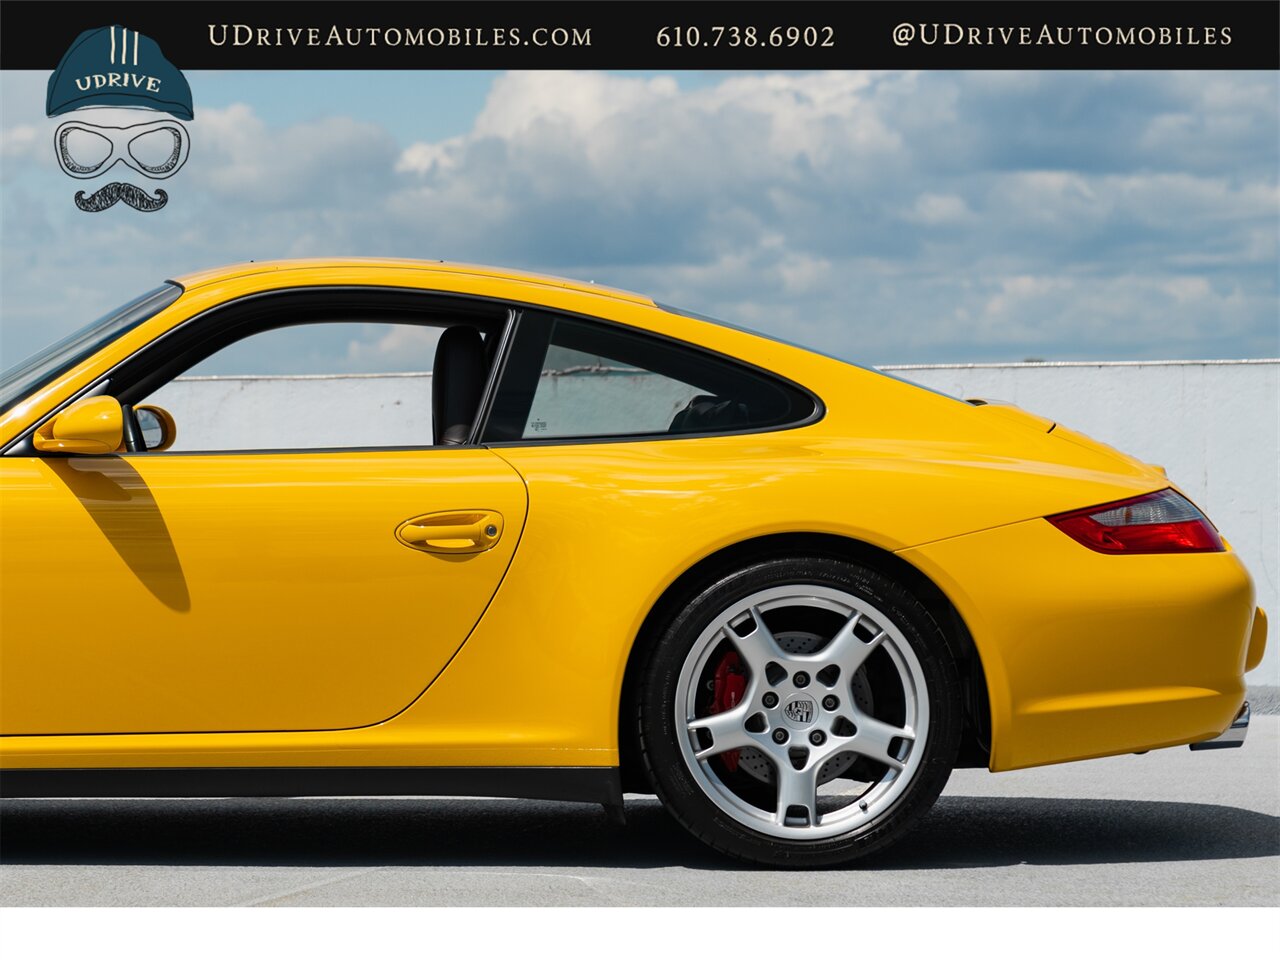 2006 Porsche 911 Carrera 4S  997 C4S 6 Speed Cocoa Full Lthr Chrono Sport Exhaust Special Color Combo - Photo 24 - West Chester, PA 19382